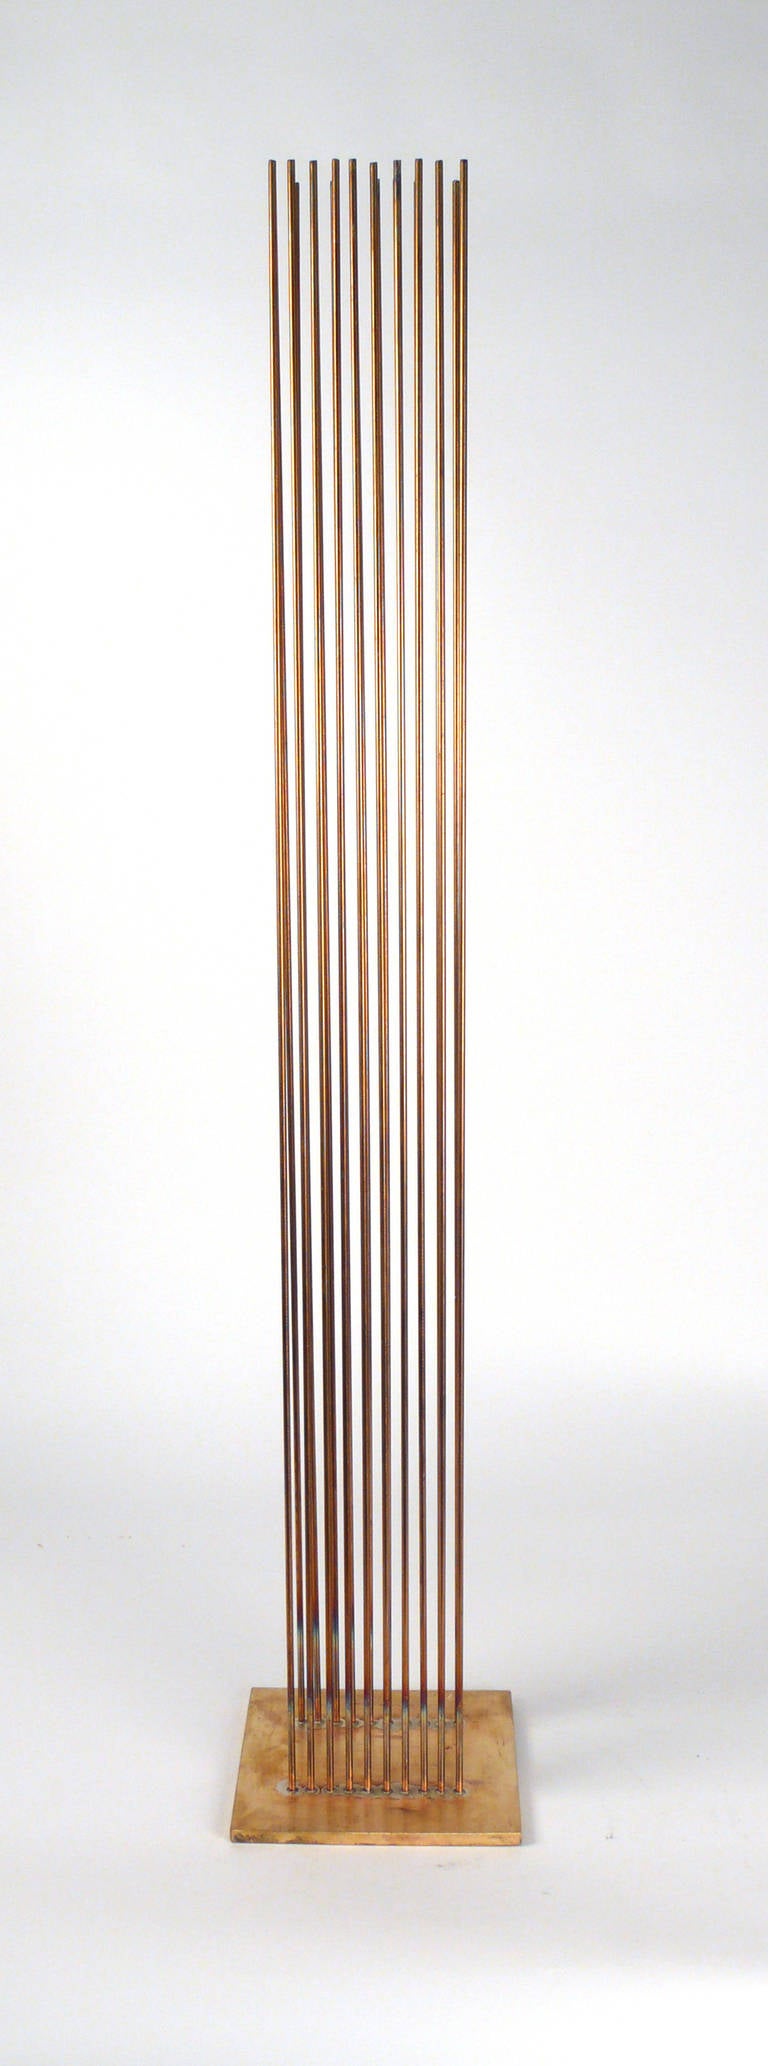 20 beryllium, copper rods in two separate rows silvered to brass base. Have CoA.

This sculpture produces sound. Please contact us for a youtube link.